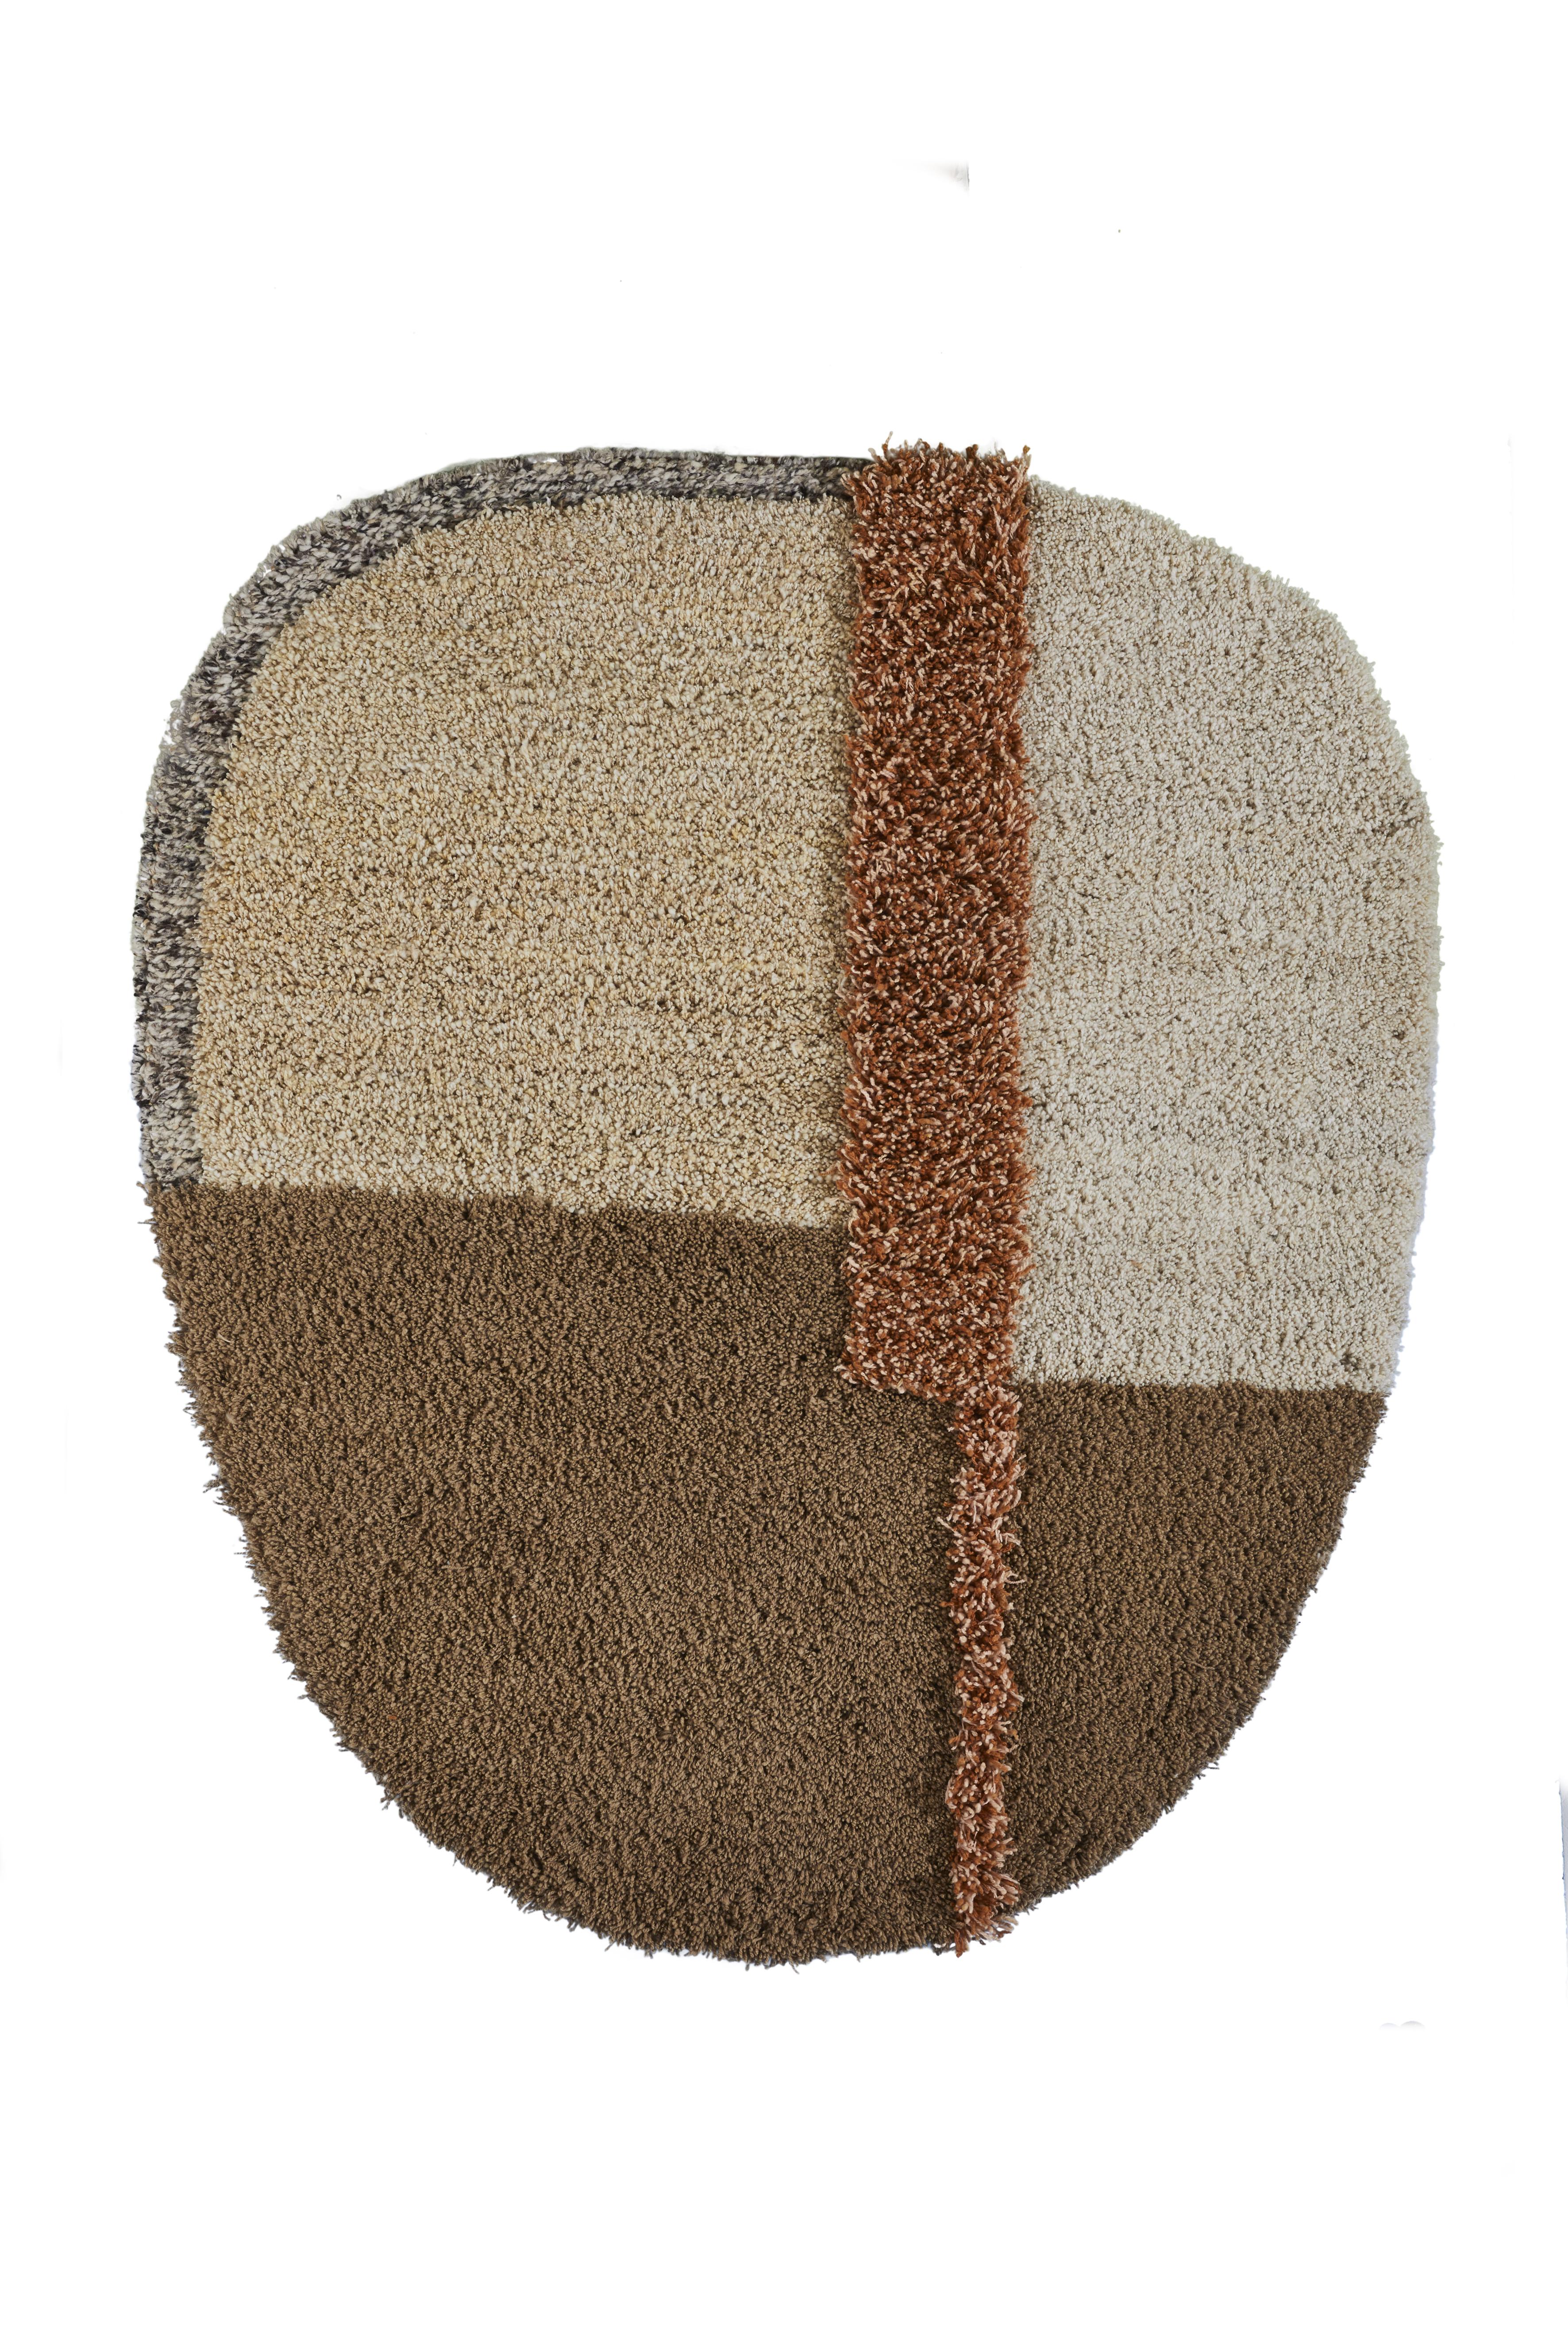 Small Nudo rug by Sebastian Herkner
Materials: 100% natural virgin wool. 
Technique: hand-woven in Colombia.
Dimensions: W 160 x L 190 cm 
Available in colors: white/ beige/ rose, grey/ green/ black, blue/ orange/ ochre, brown/ black/ grey,